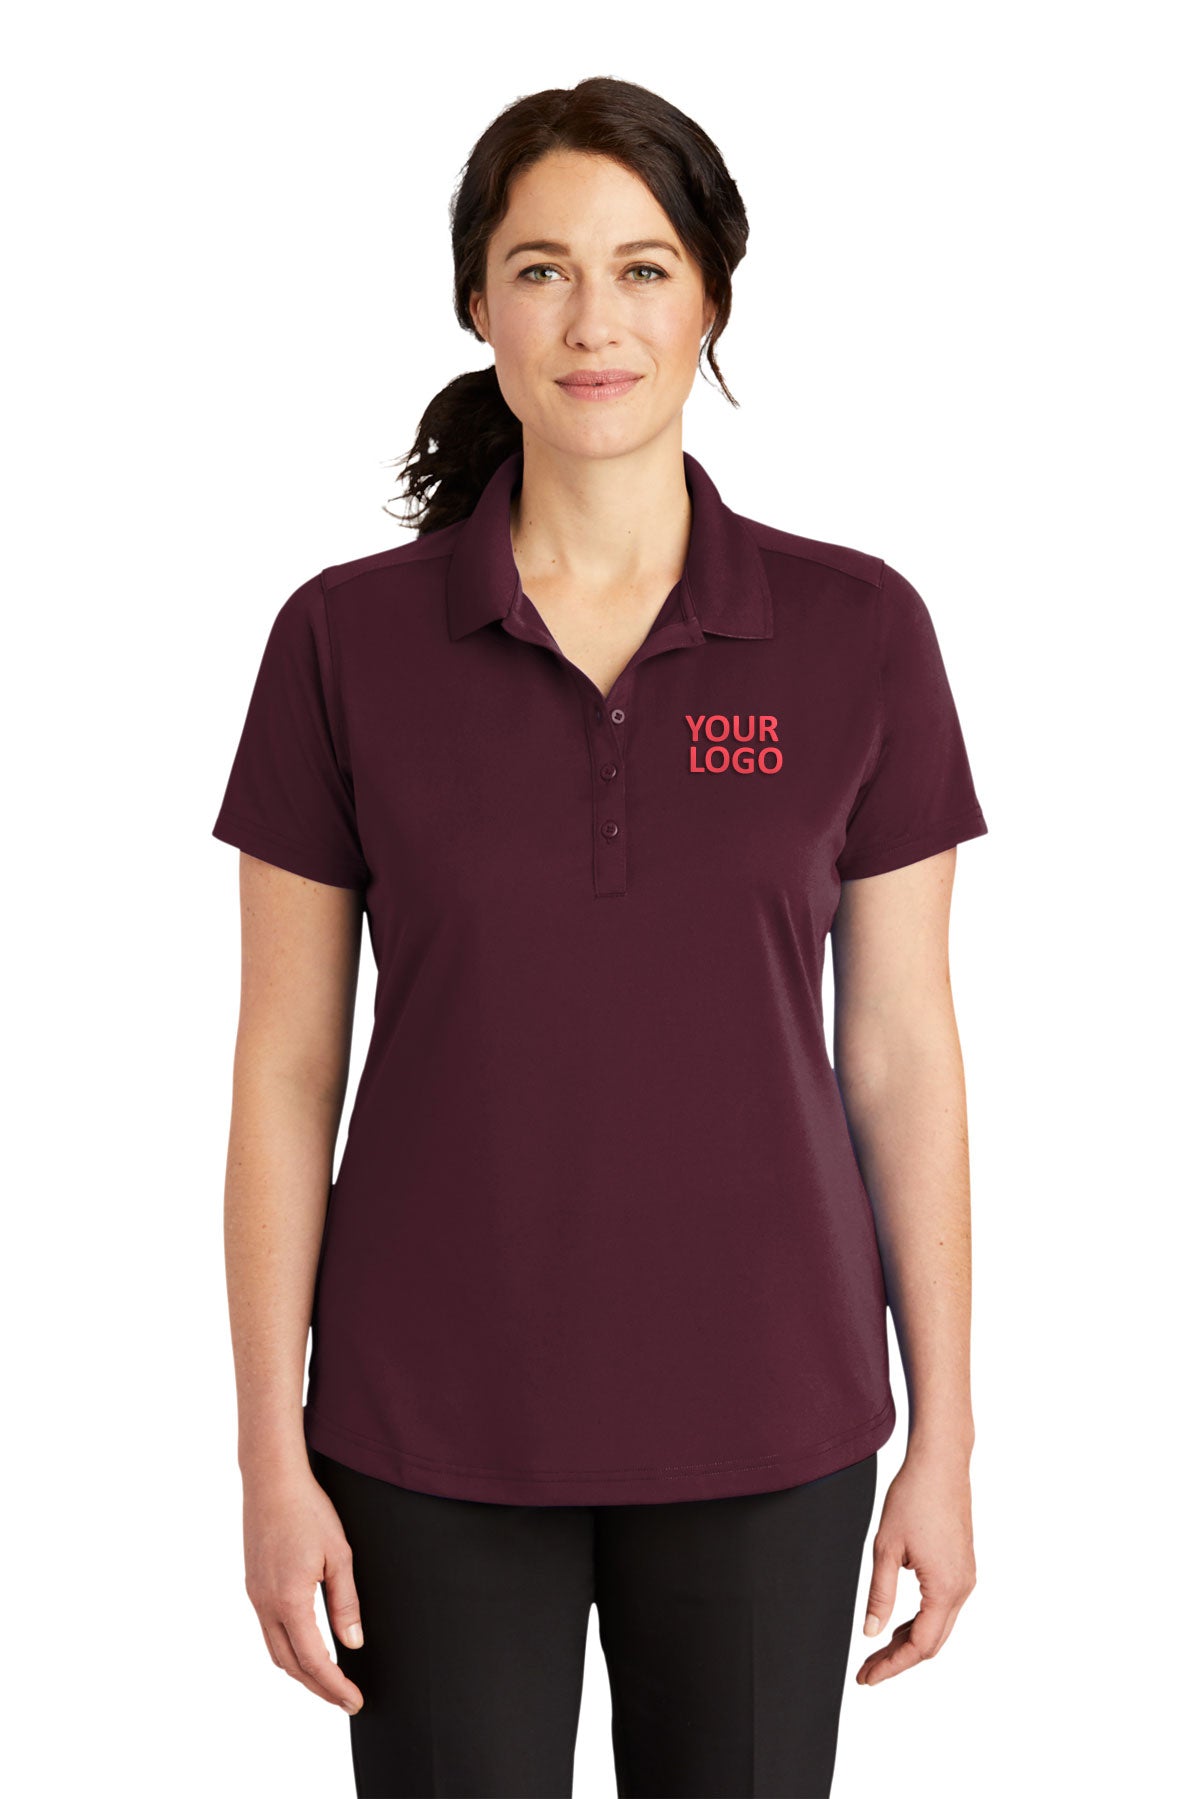 CornerStone Maroon CS419 polo shirt with logo embroidered